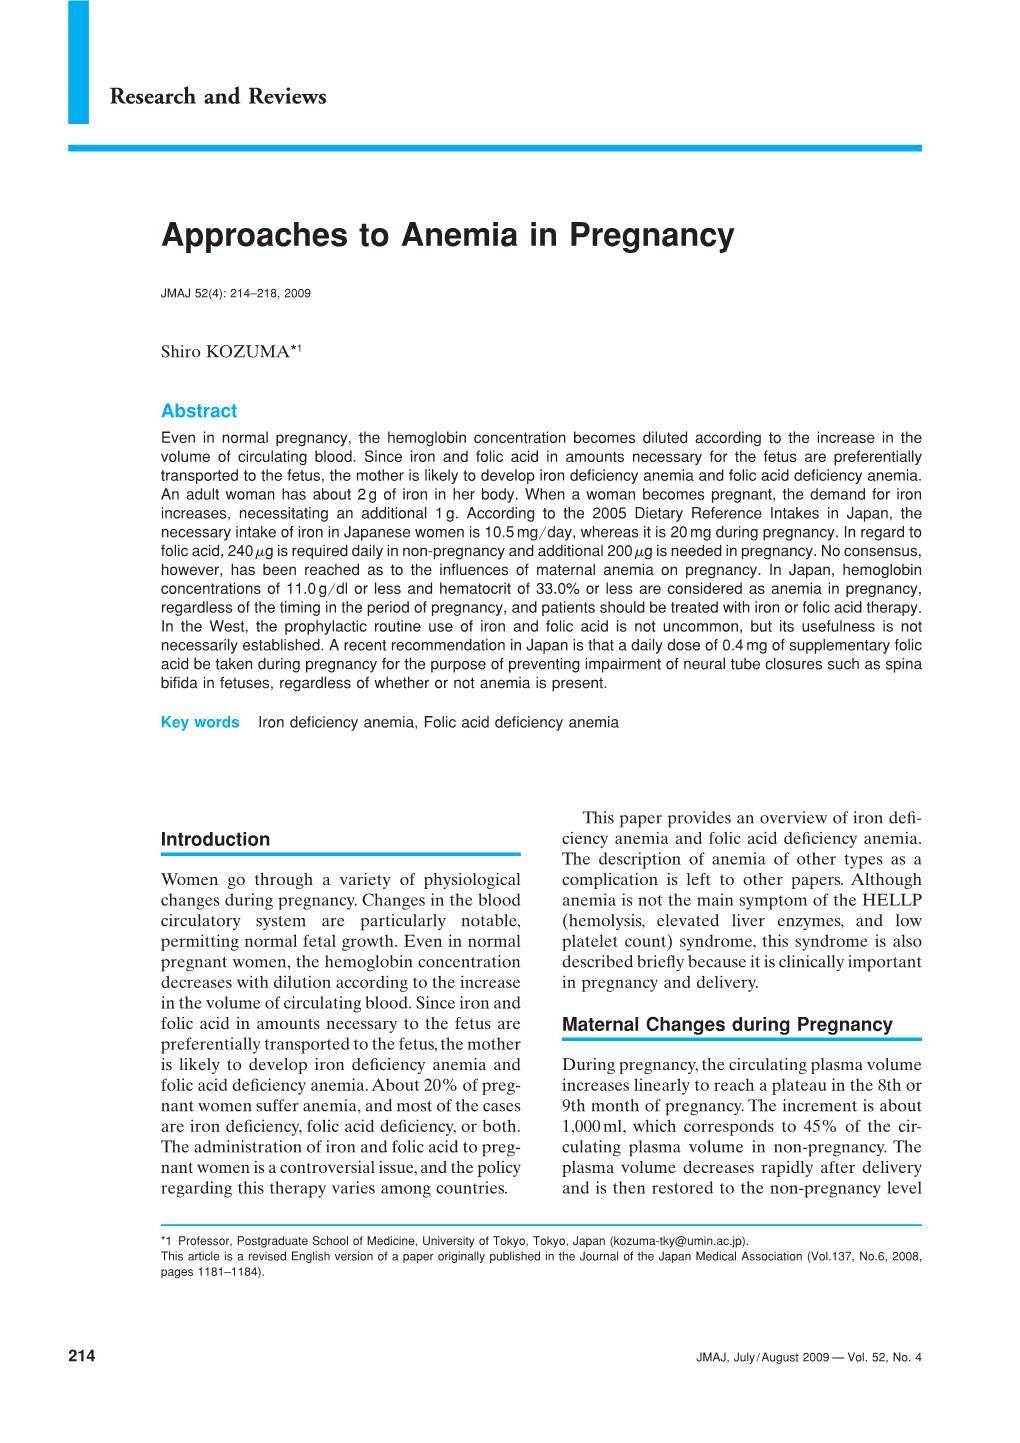 Approaches to Anemia in Pregnancy